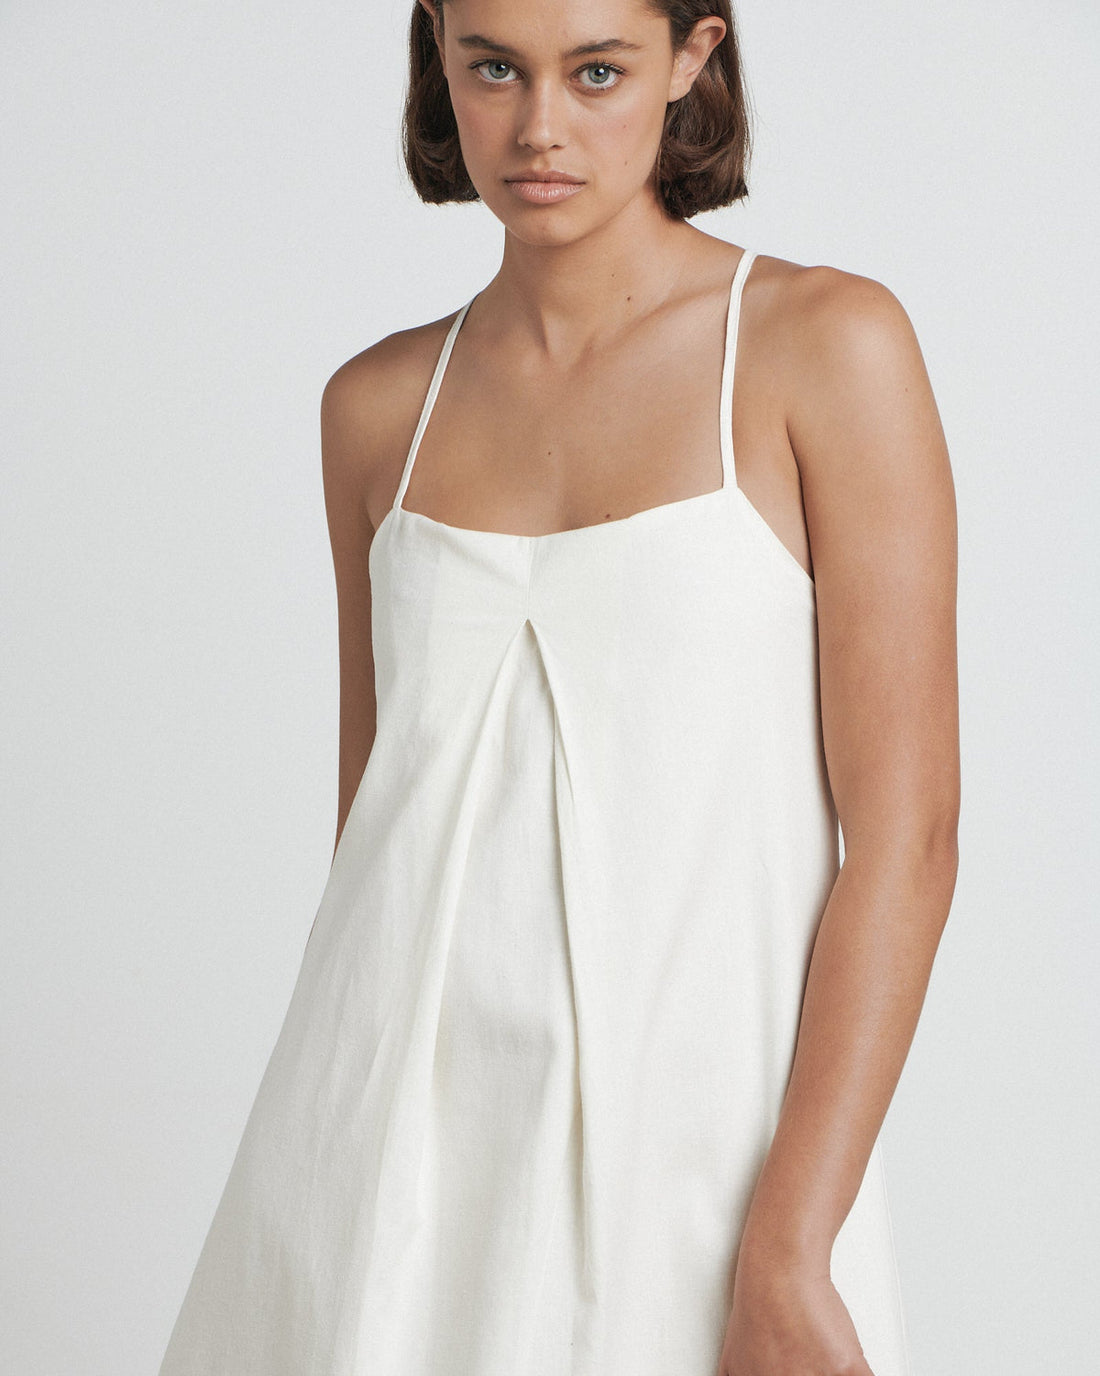 CHARLIE HOLIDAY THE TIE BACK MAXI DRESS - COCONUT MILK